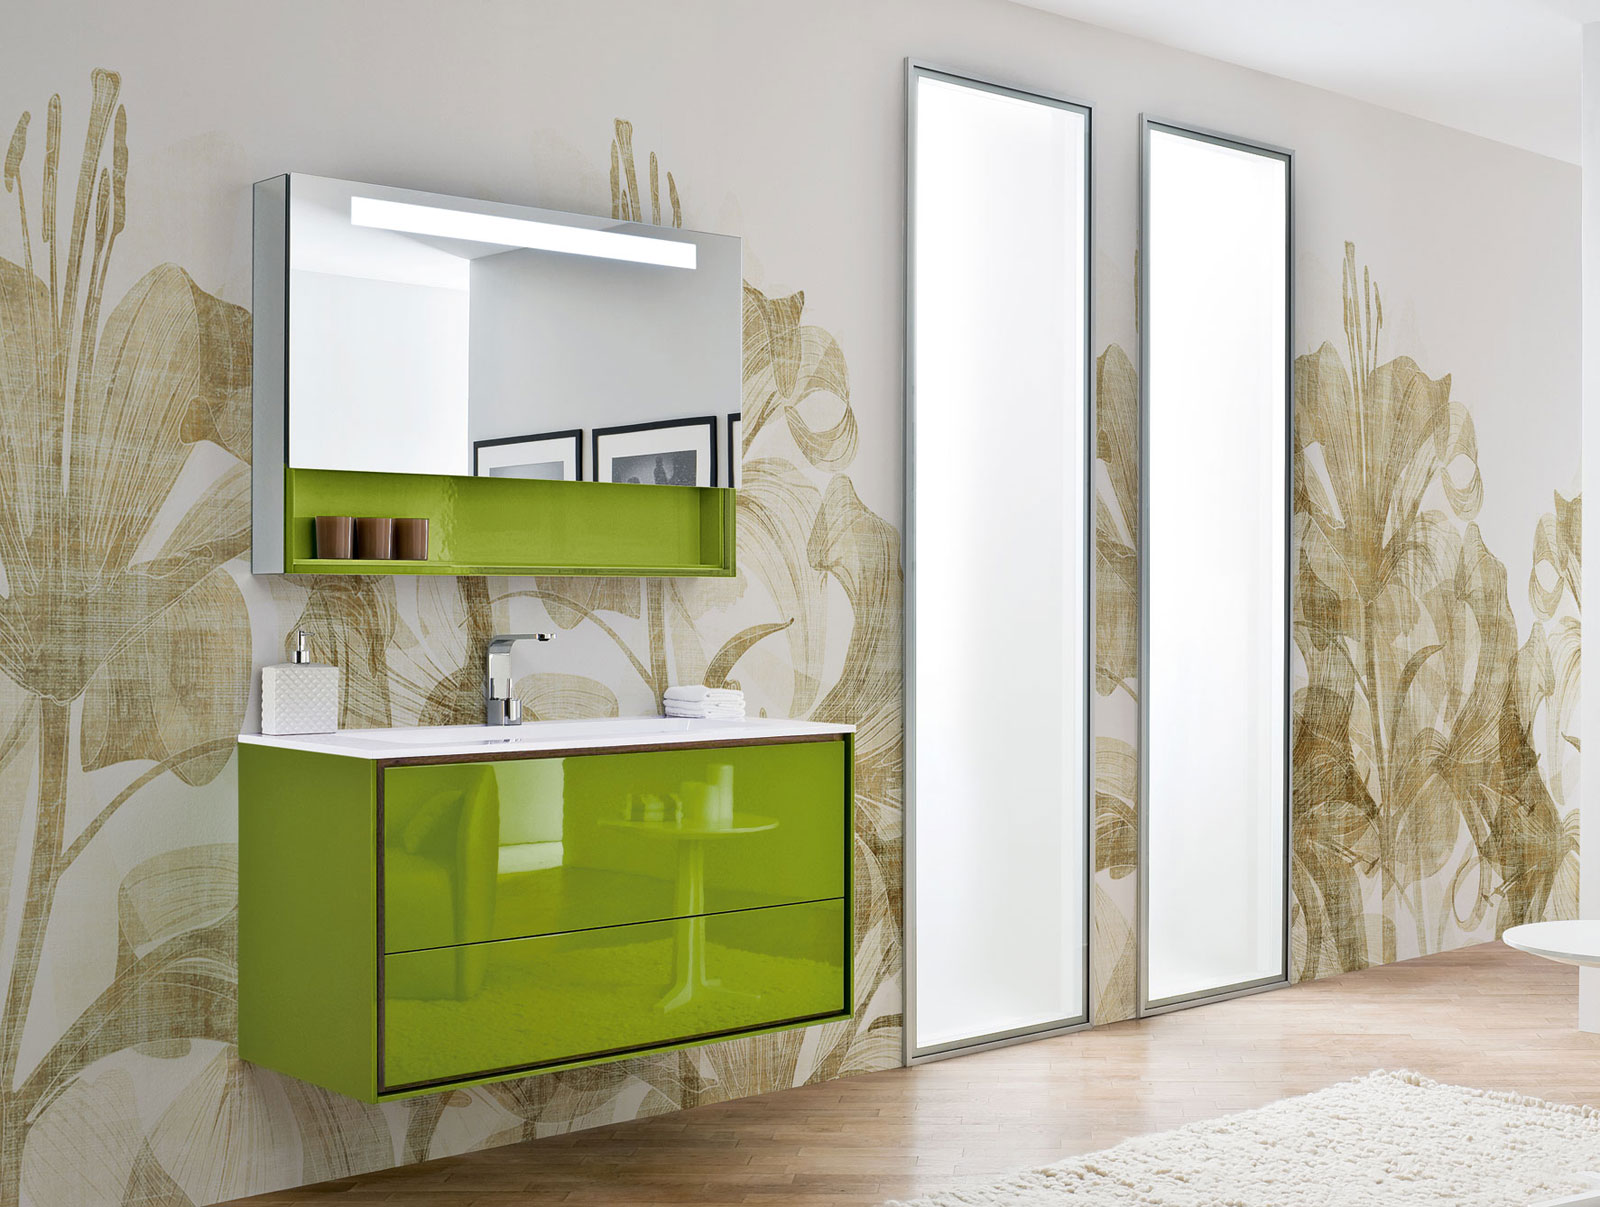 Modern Bathroom Design Stunning Modern Bathroom With Minimalist Design Applying Flowers Wall Painting Decorations Completed With Bathroom Vanity Cabinets In Green Color And Furnished With Mirror 15 Bathroom Vanity Cabinets For Your Captivating Home